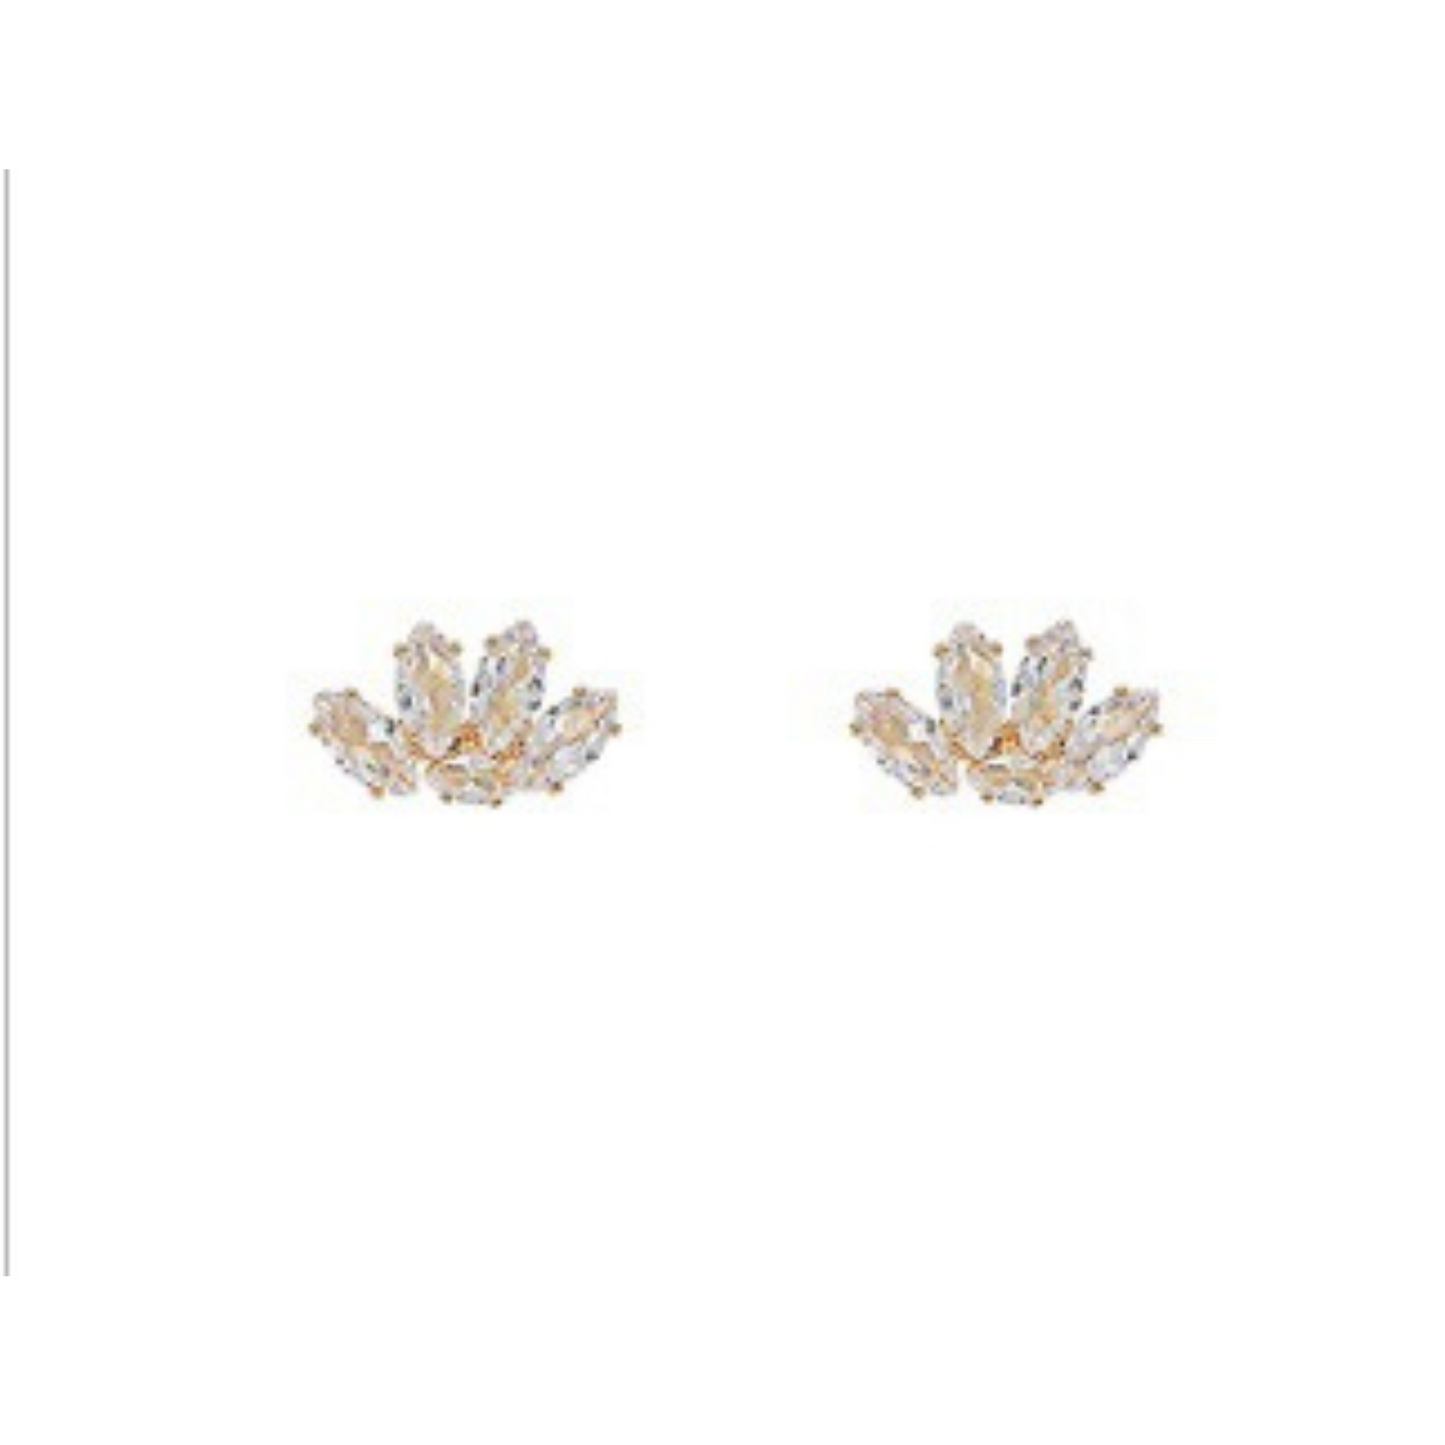 Add a royal touch to any ensemble with these beautiful Crown Studs. Crafted from gold-colored metal and embedded with sparkling rhinestones, these studs feature a classic crown shape. Perfect for everyday wear or a special occasion.